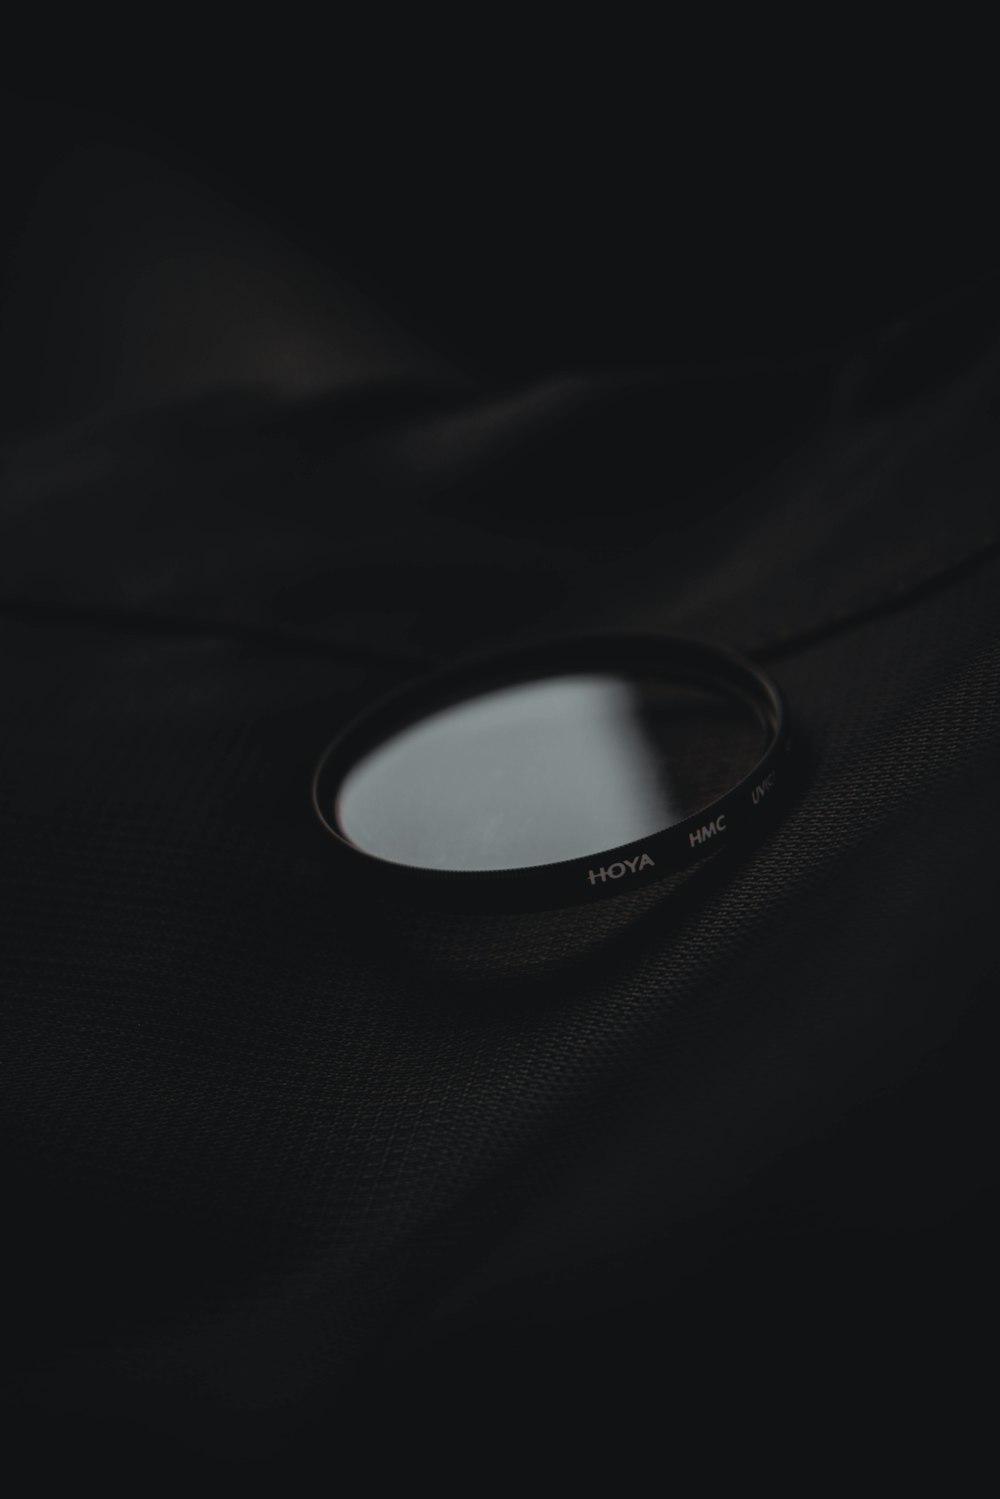 a close up of a lens on a black background